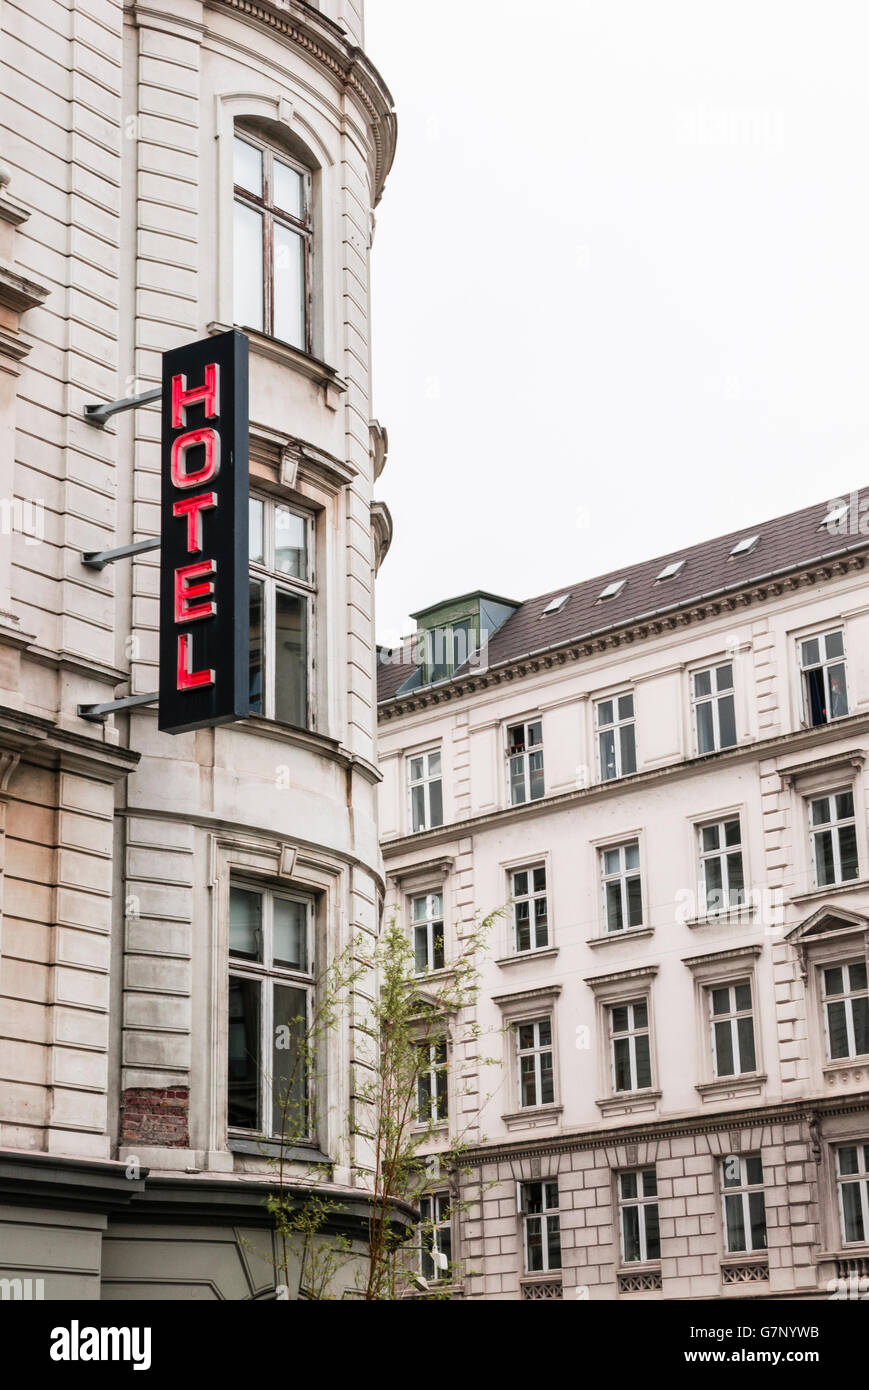 Sign for a hotel in Copenhagen. Stock Photo